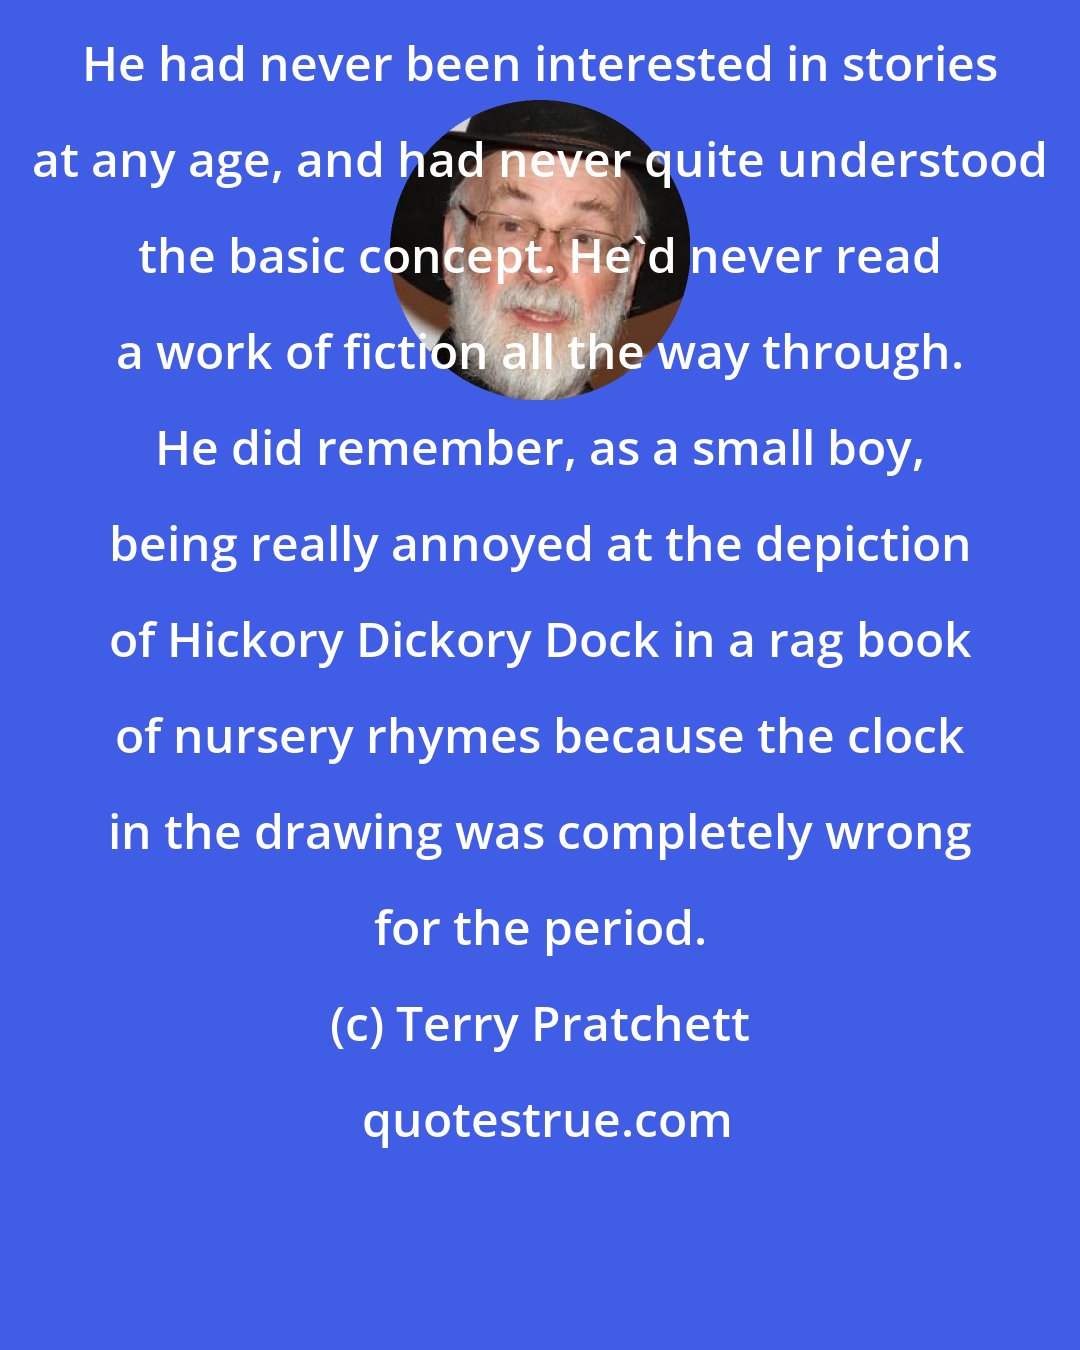 Terry Pratchett: He had never been interested in stories at any age, and had never quite understood the basic concept. He'd never read a work of fiction all the way through. He did remember, as a small boy, being really annoyed at the depiction of Hickory Dickory Dock in a rag book of nursery rhymes because the clock in the drawing was completely wrong for the period.